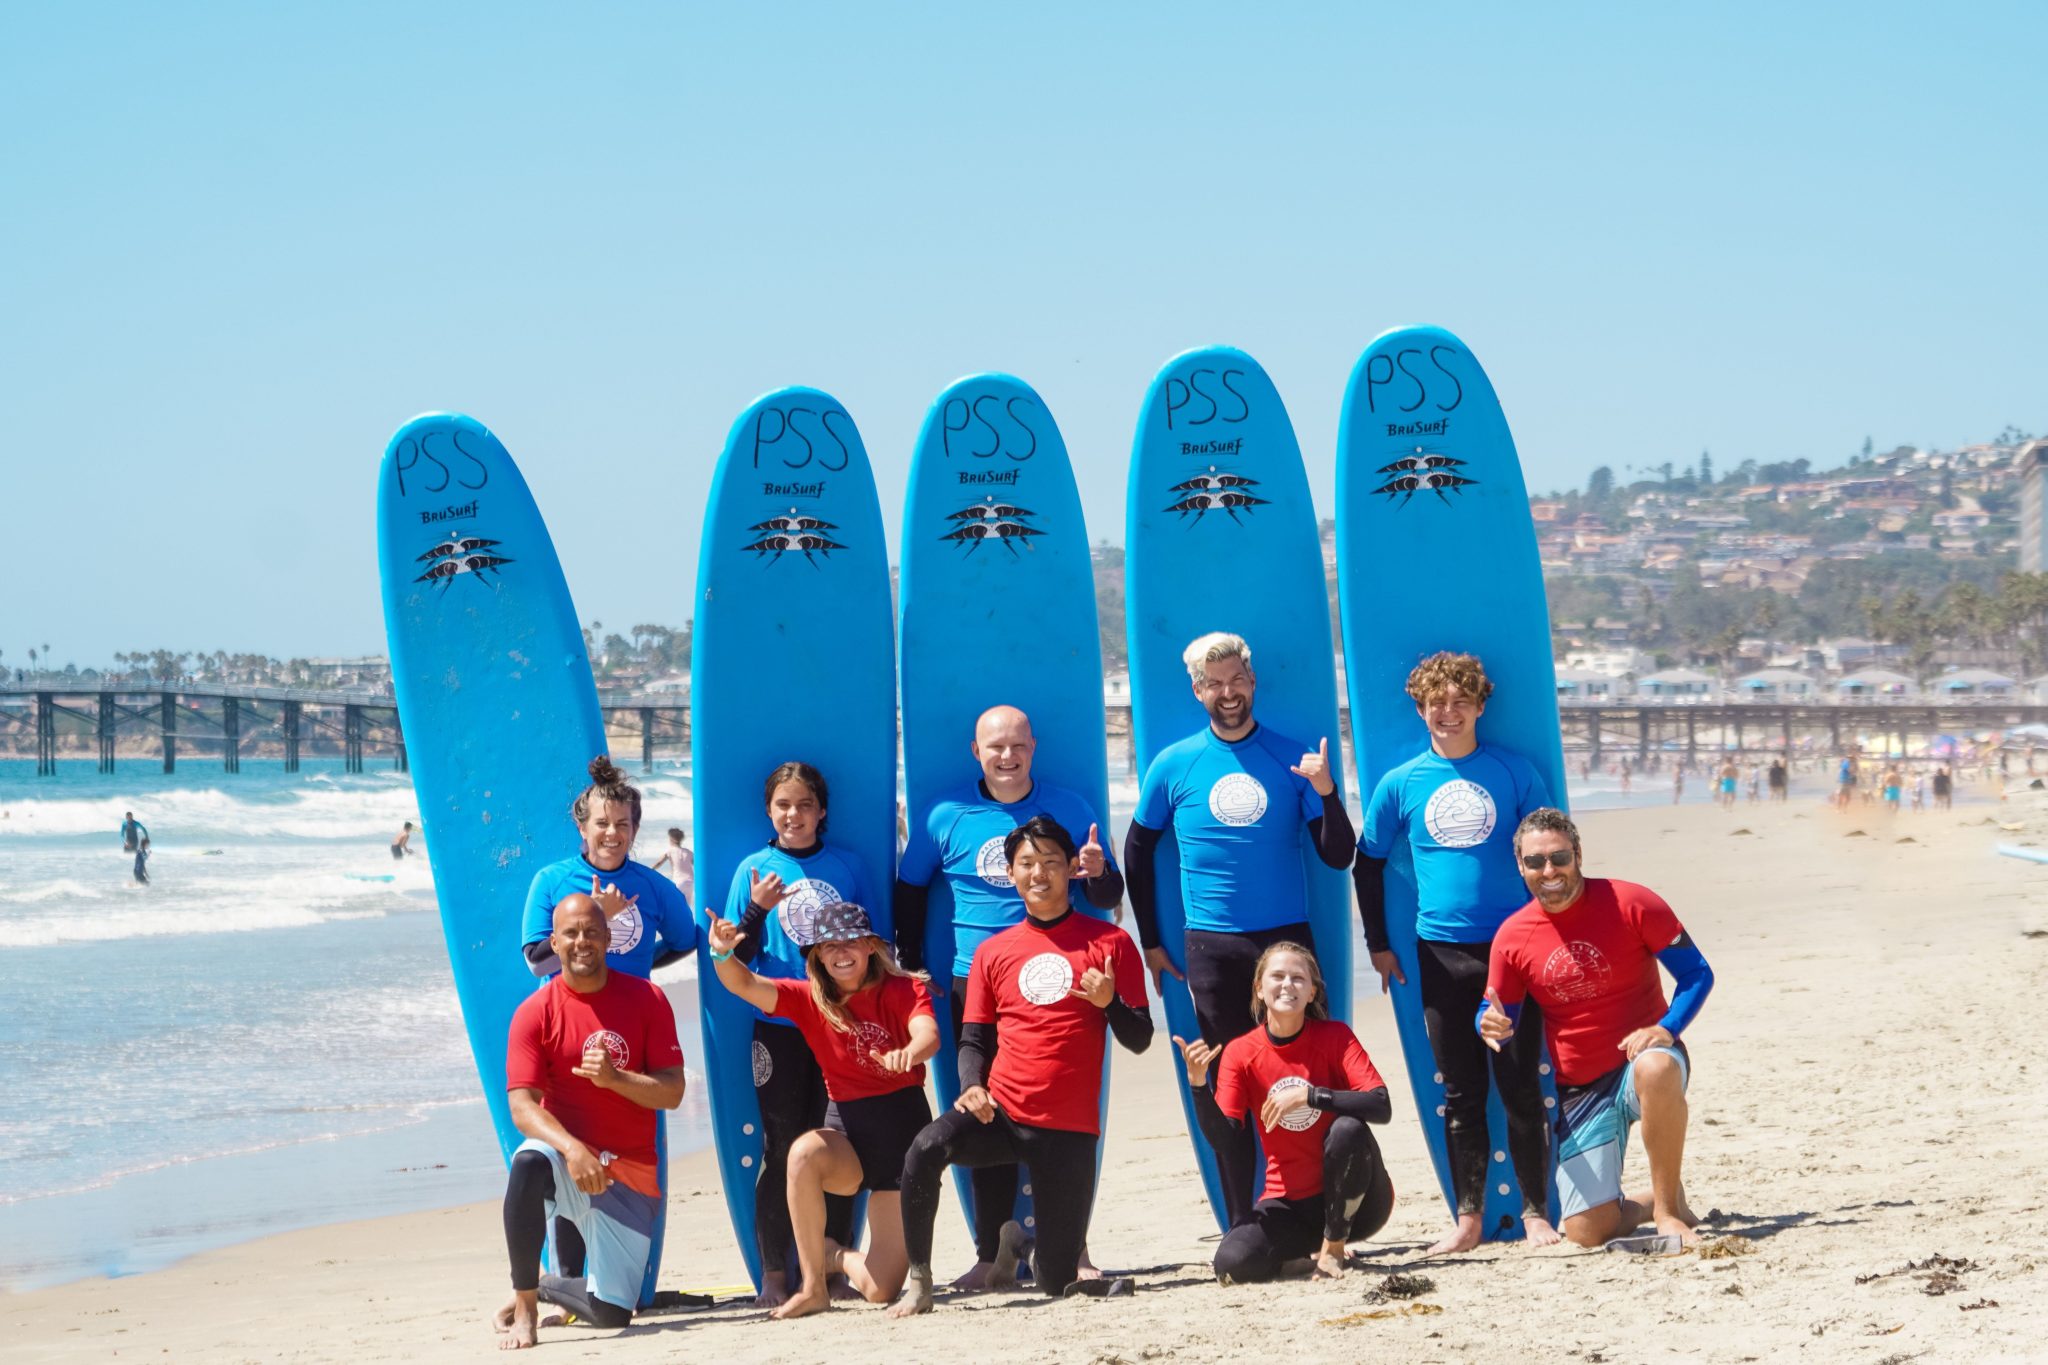 Our Surf School San Diego Surf Lessons